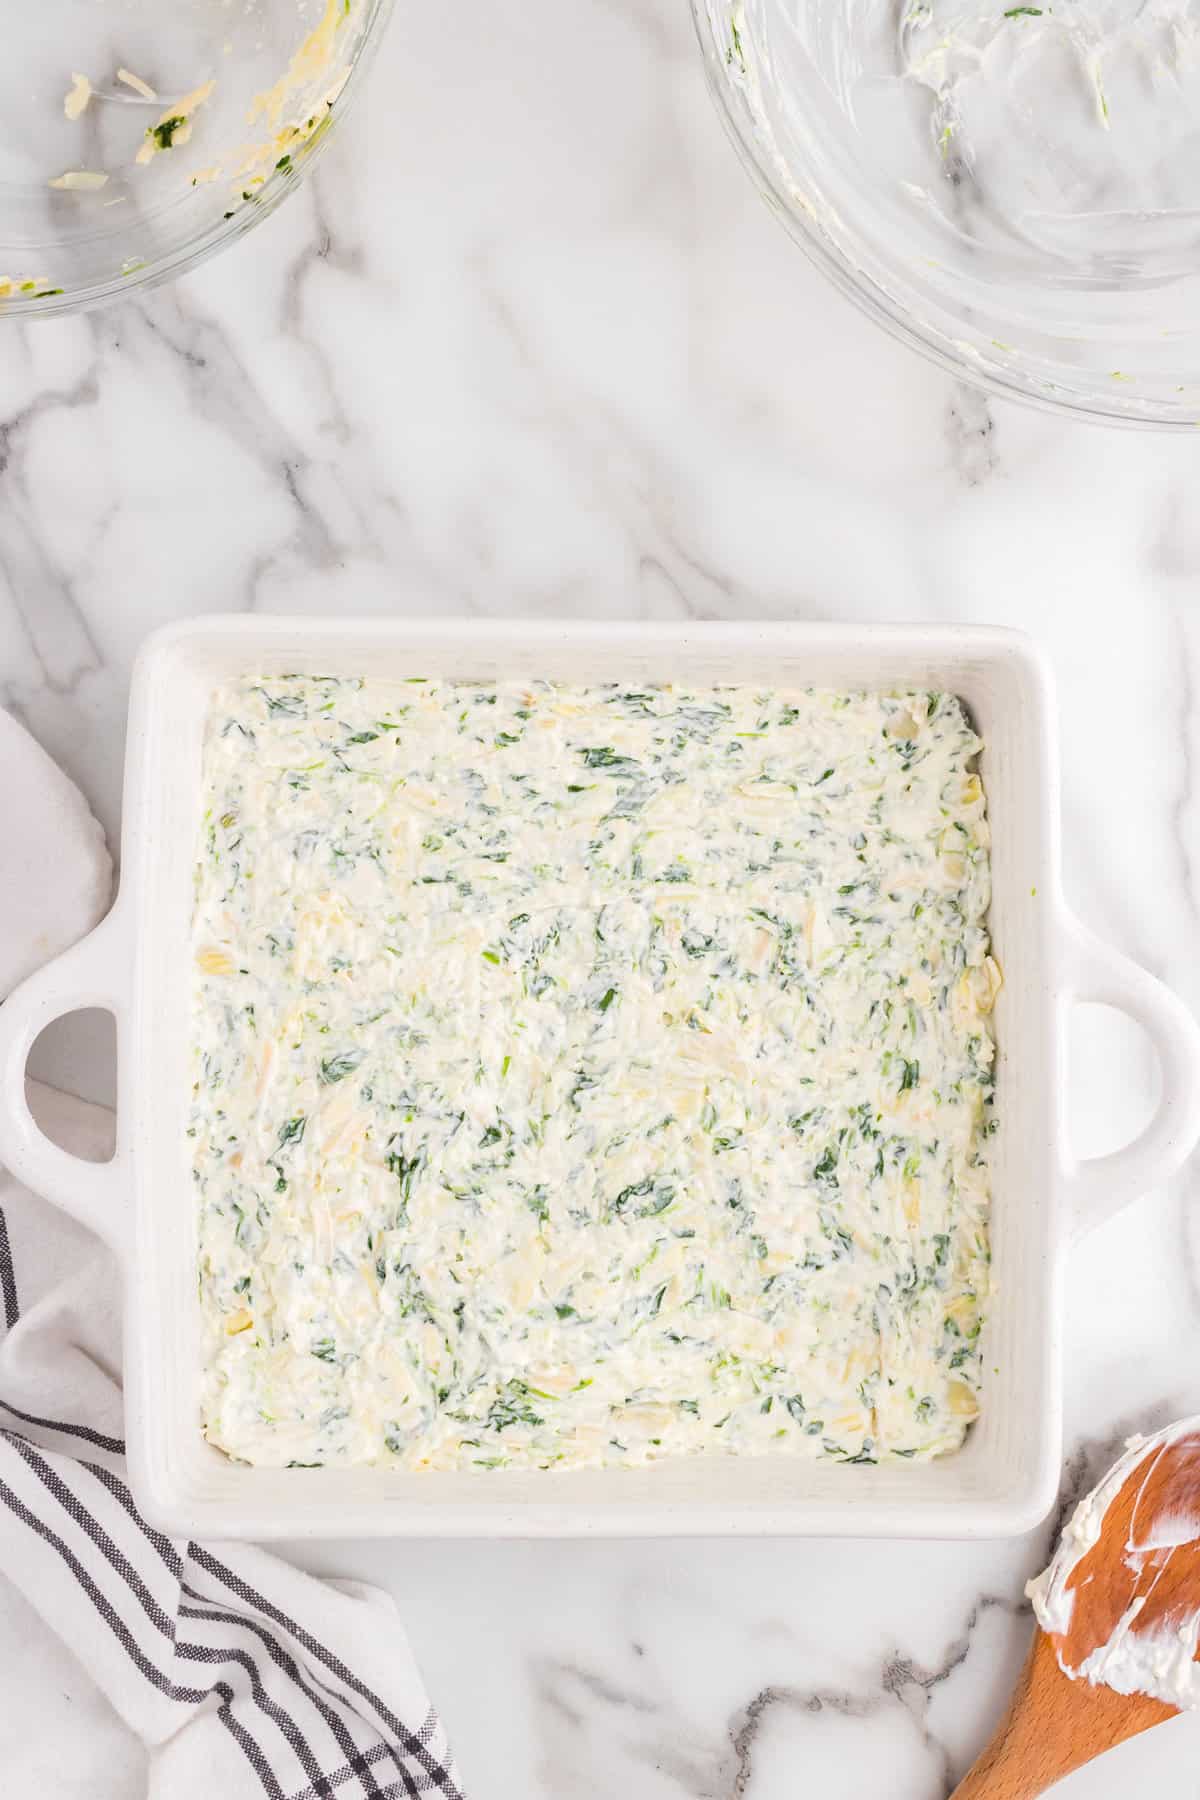 Spreading Spinach Artichoke Dip mixture in sqaure baking dish